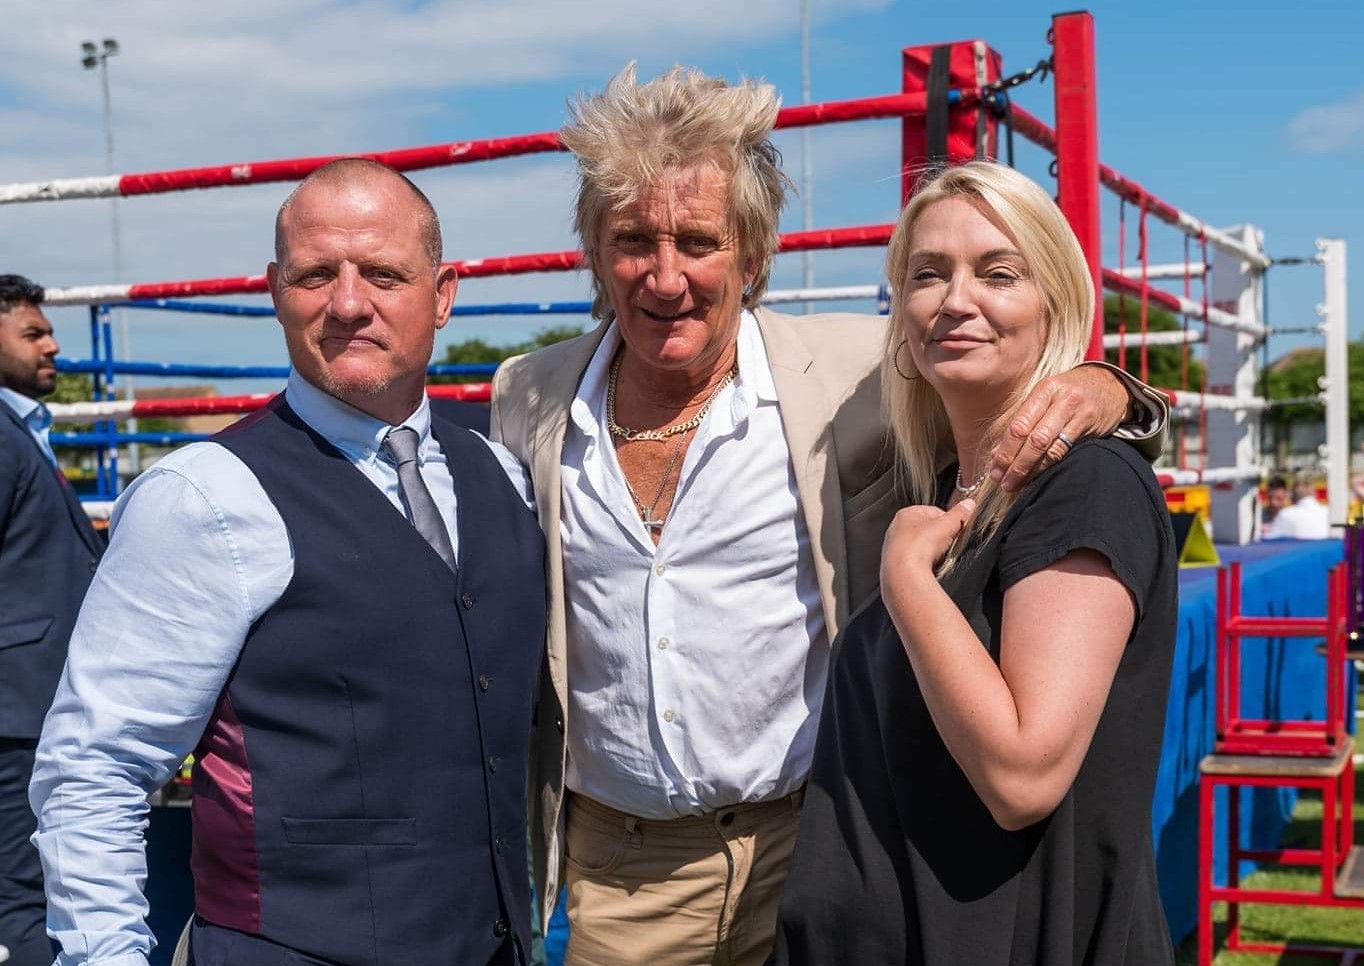 'Absolute gentleman' - Sir Rod Stewart visits Clacton for boxing match